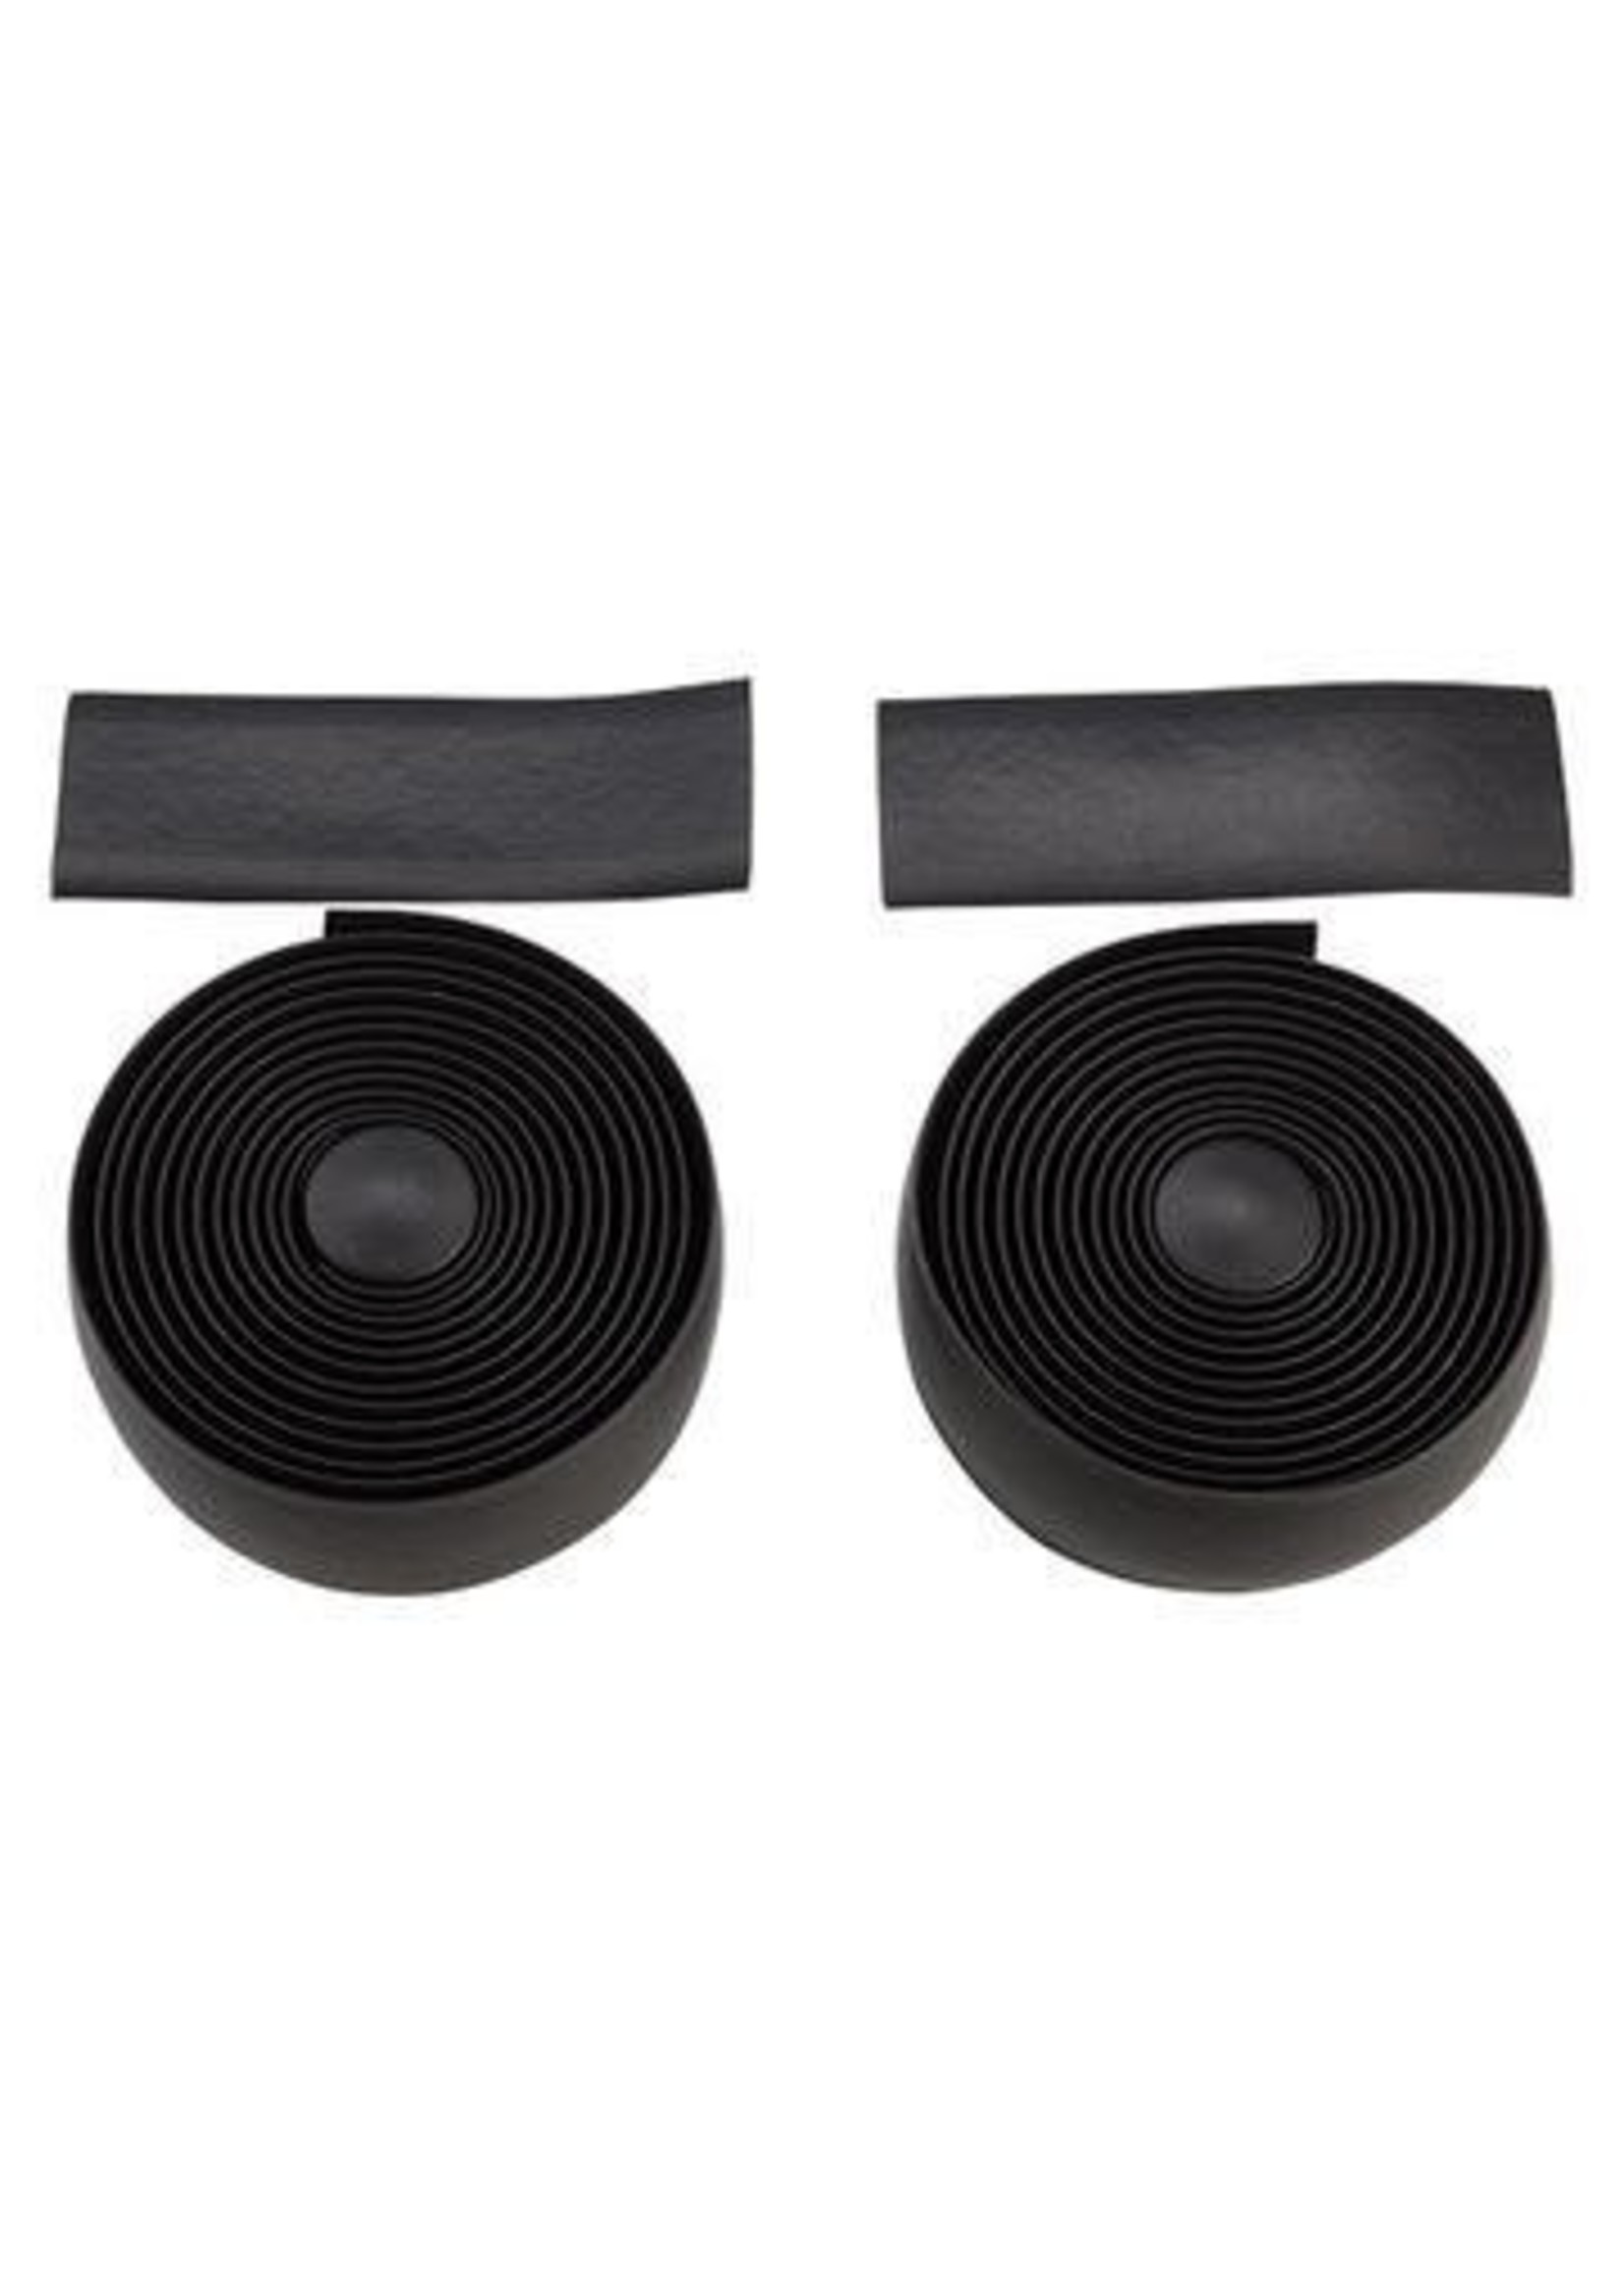 MSW Black Silicone Handle Bar Tape